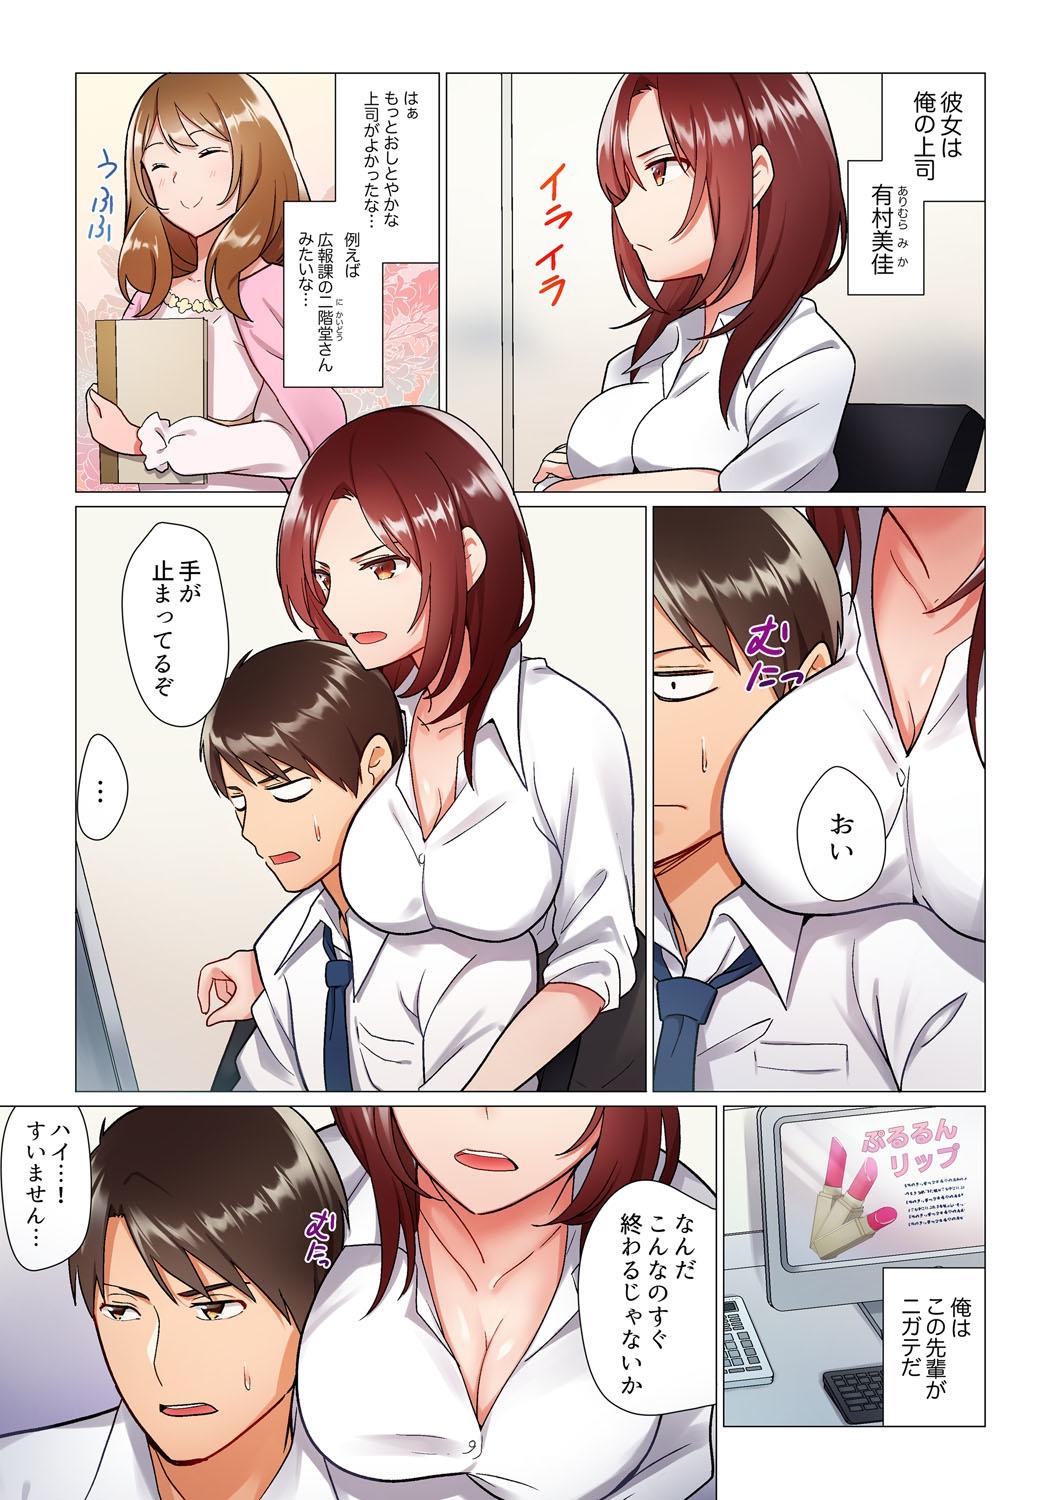 Aussie 居眠り中の女上司にこっそり挿入（※寝たフリしながらイッてました）1-10 Pick Up - Page 4